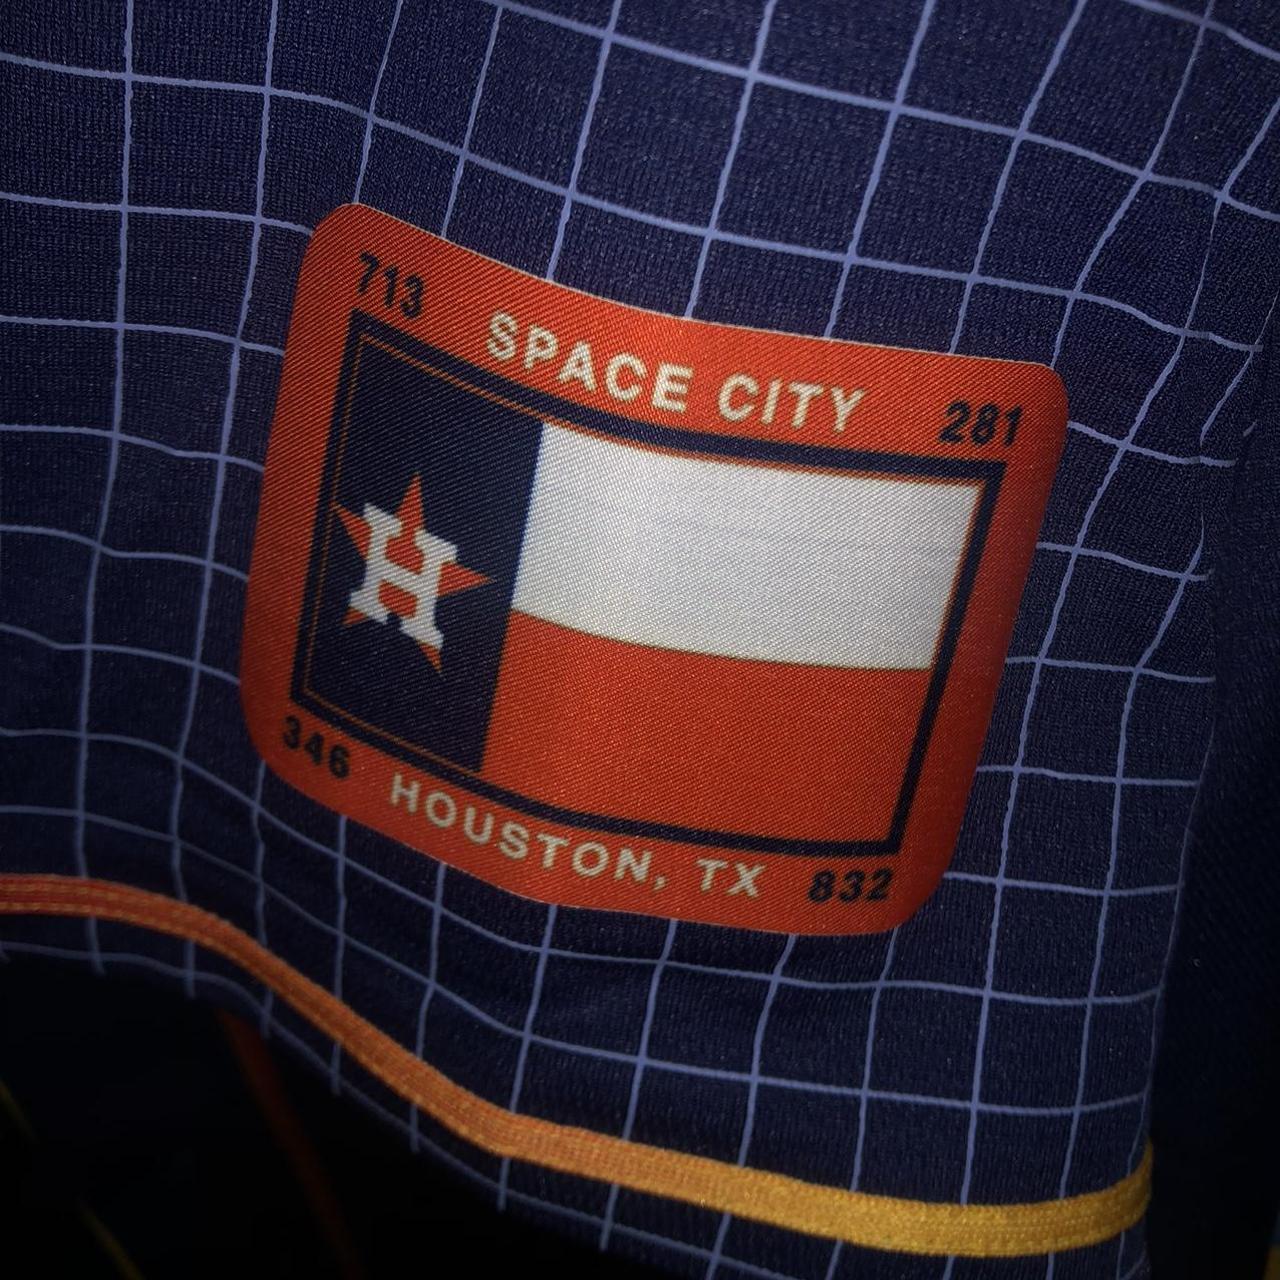 NIKE+Houston+ASTROS+Justin+Verlander+SPACE+CITY+Connect+JERSEY+